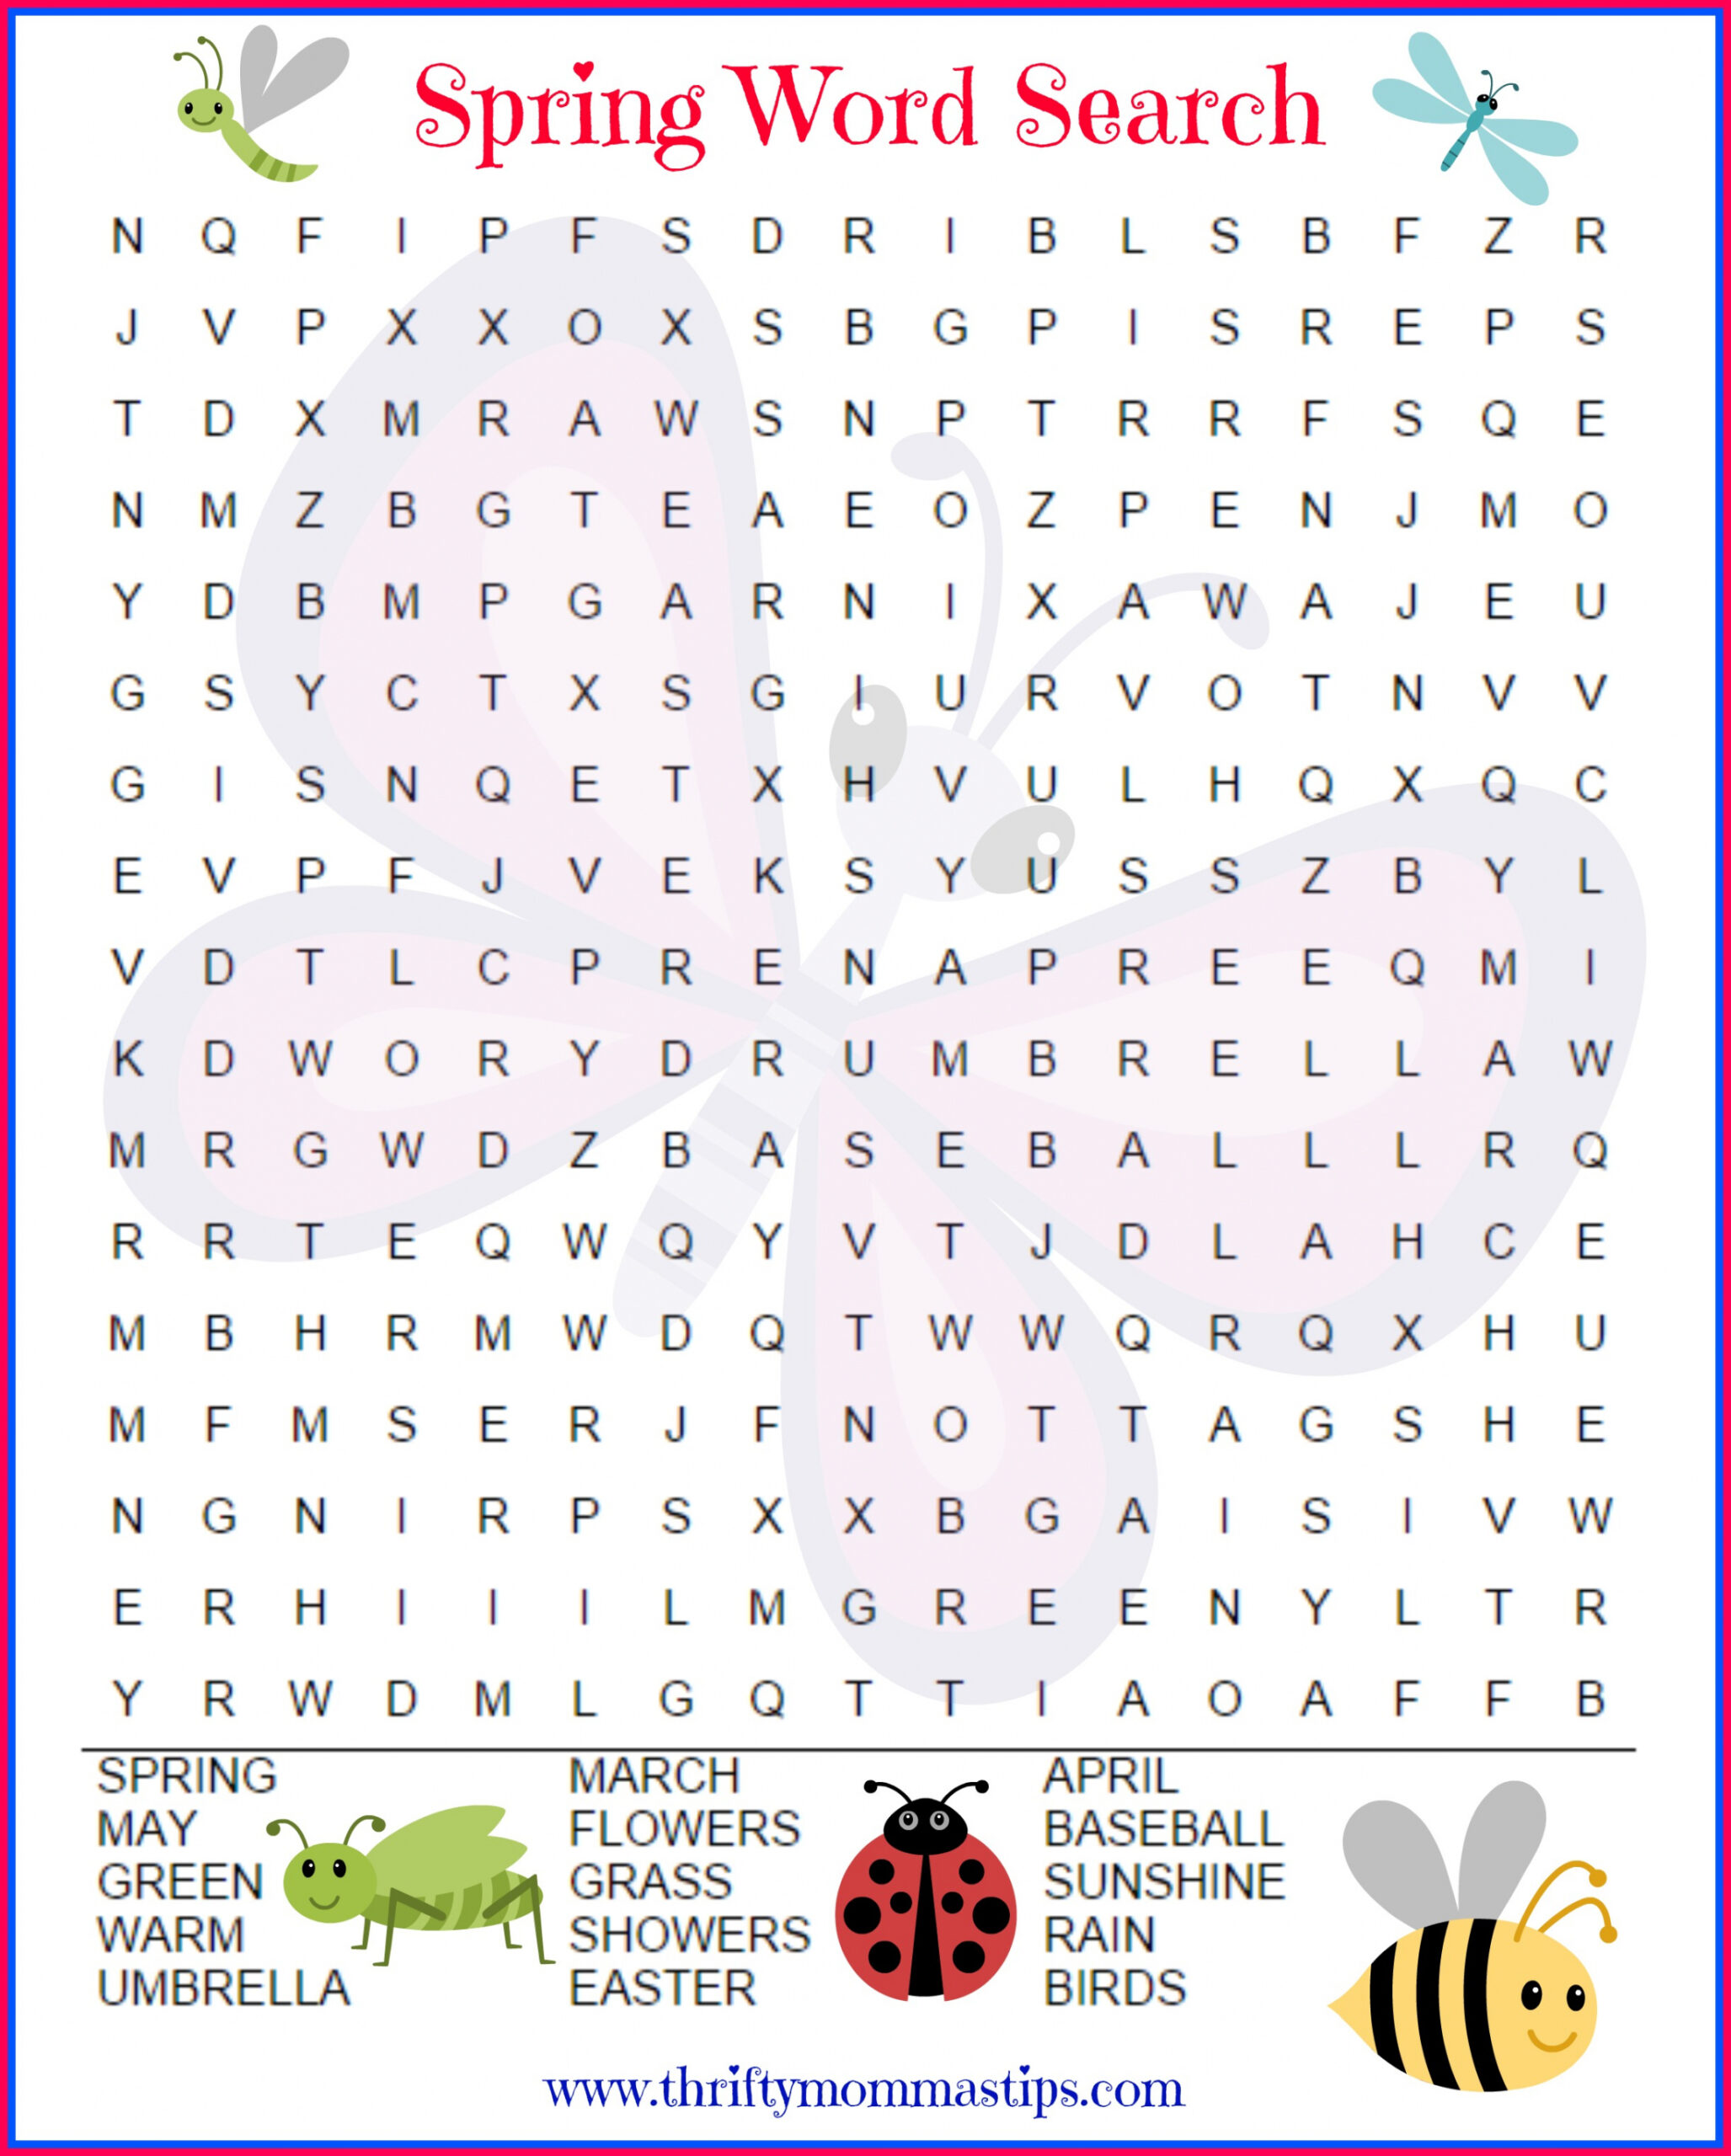 Spring Word Search Free Printable - Printable - Fun Spring Word Search for Kids - Thrifty Mommas Tips